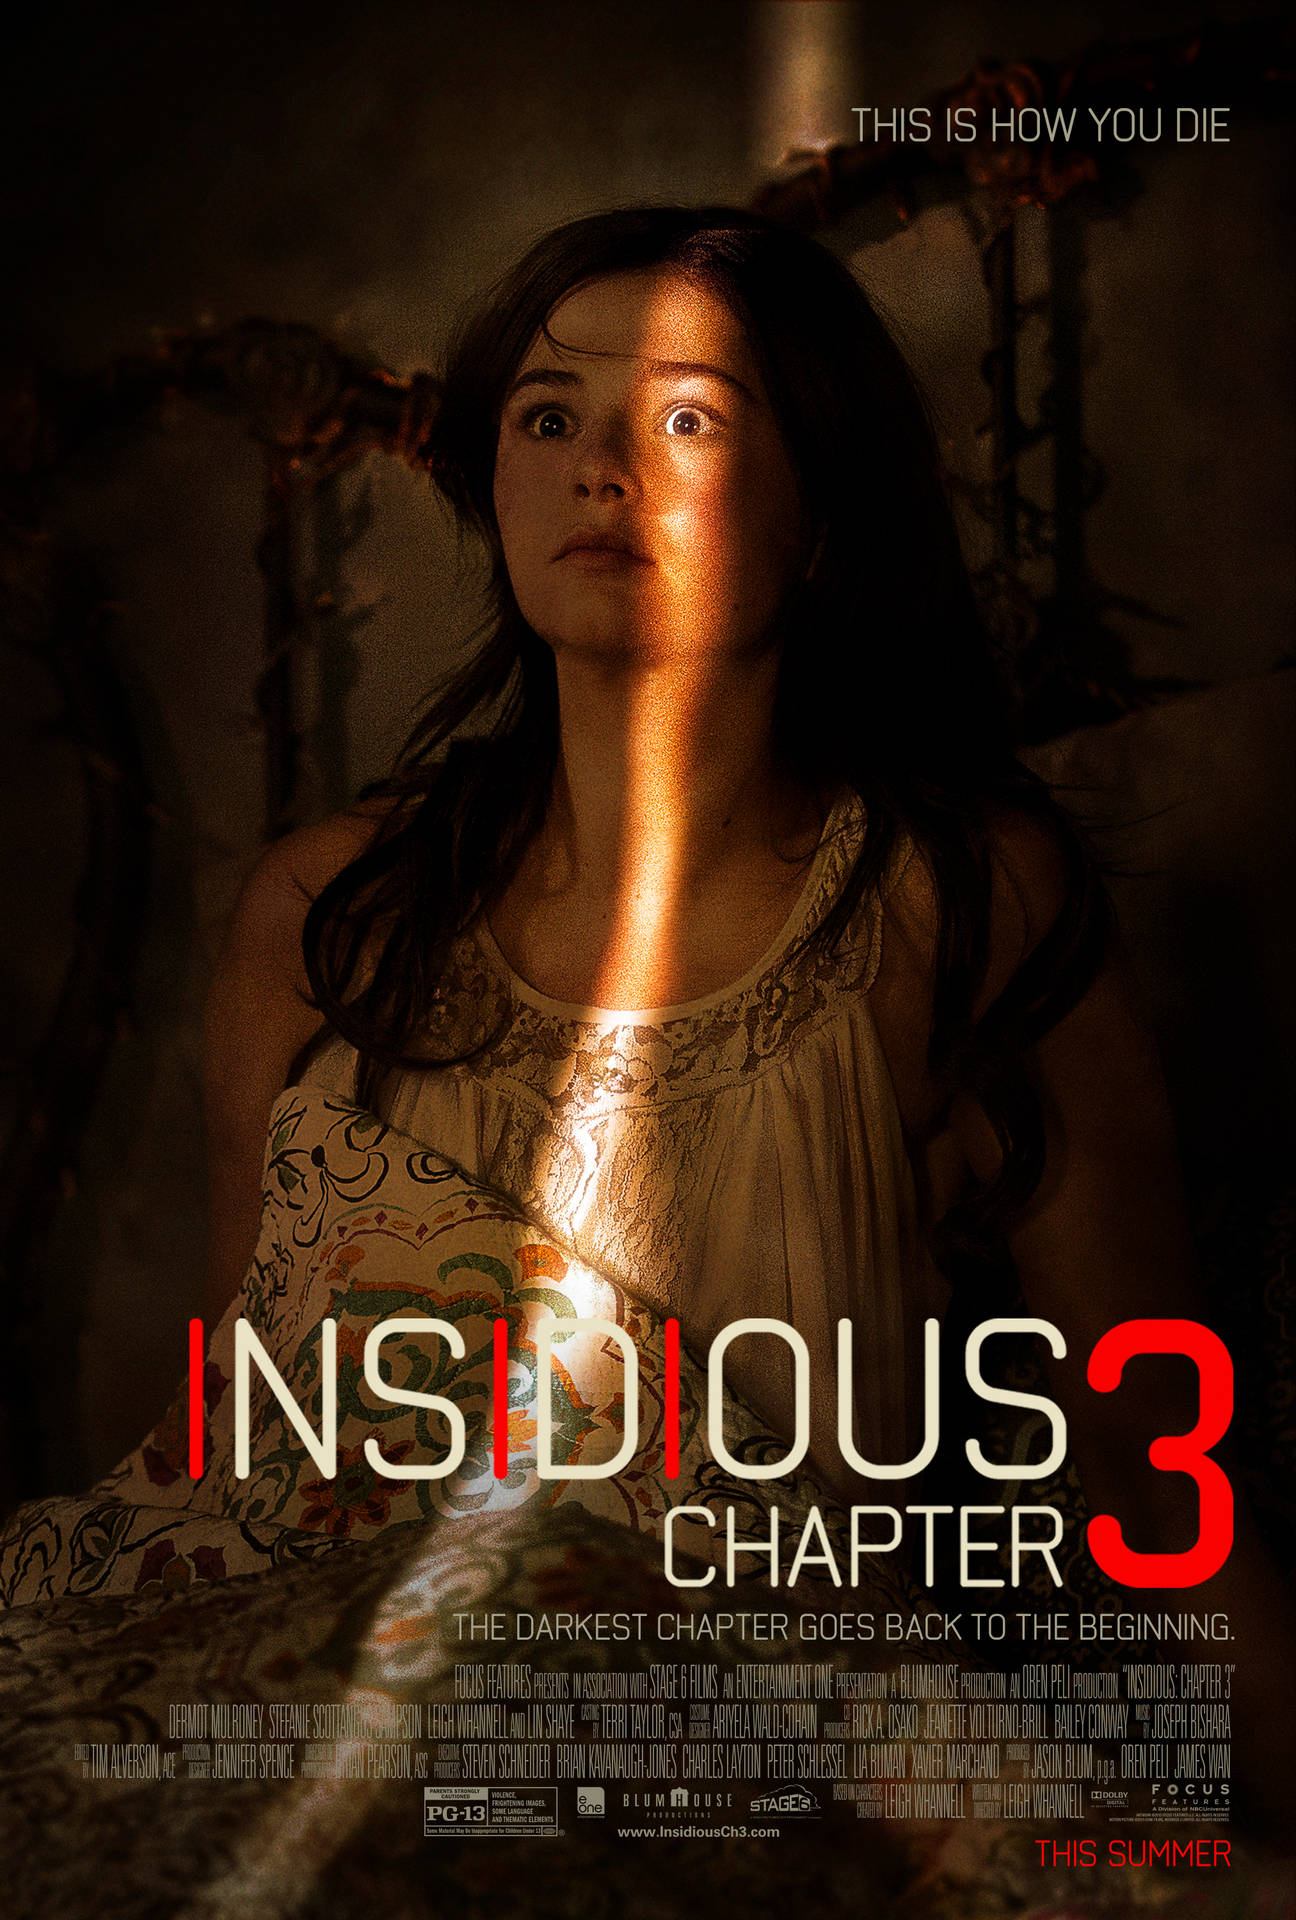 Insidious 3 Film Poster Background